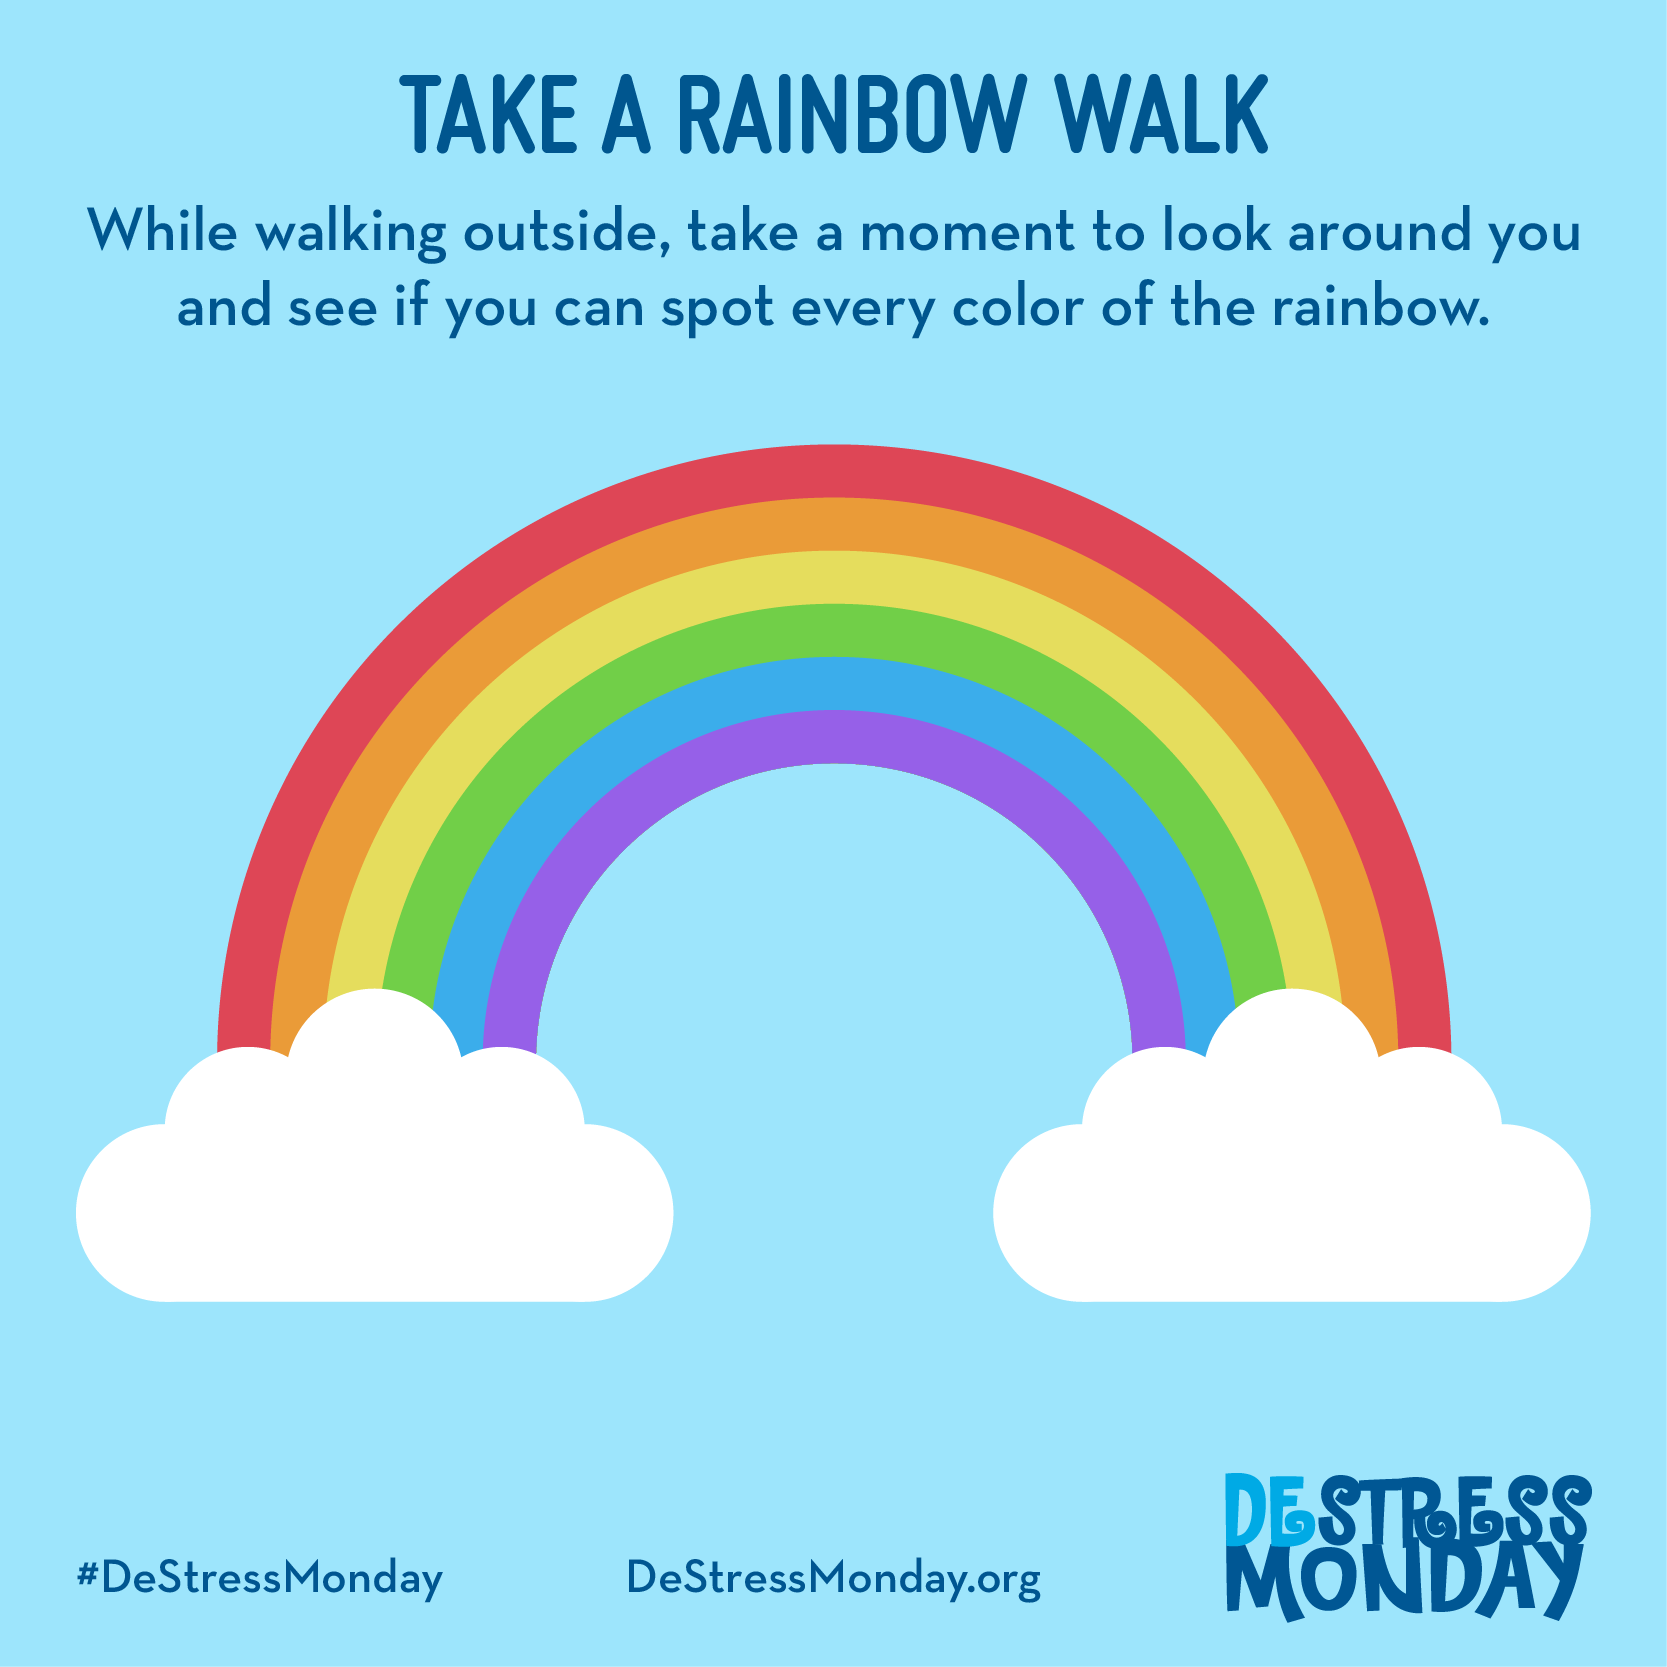 Take a rainbow walk. While walking outside, take a moment to look around you and see if you can spot every color of the rainbow.